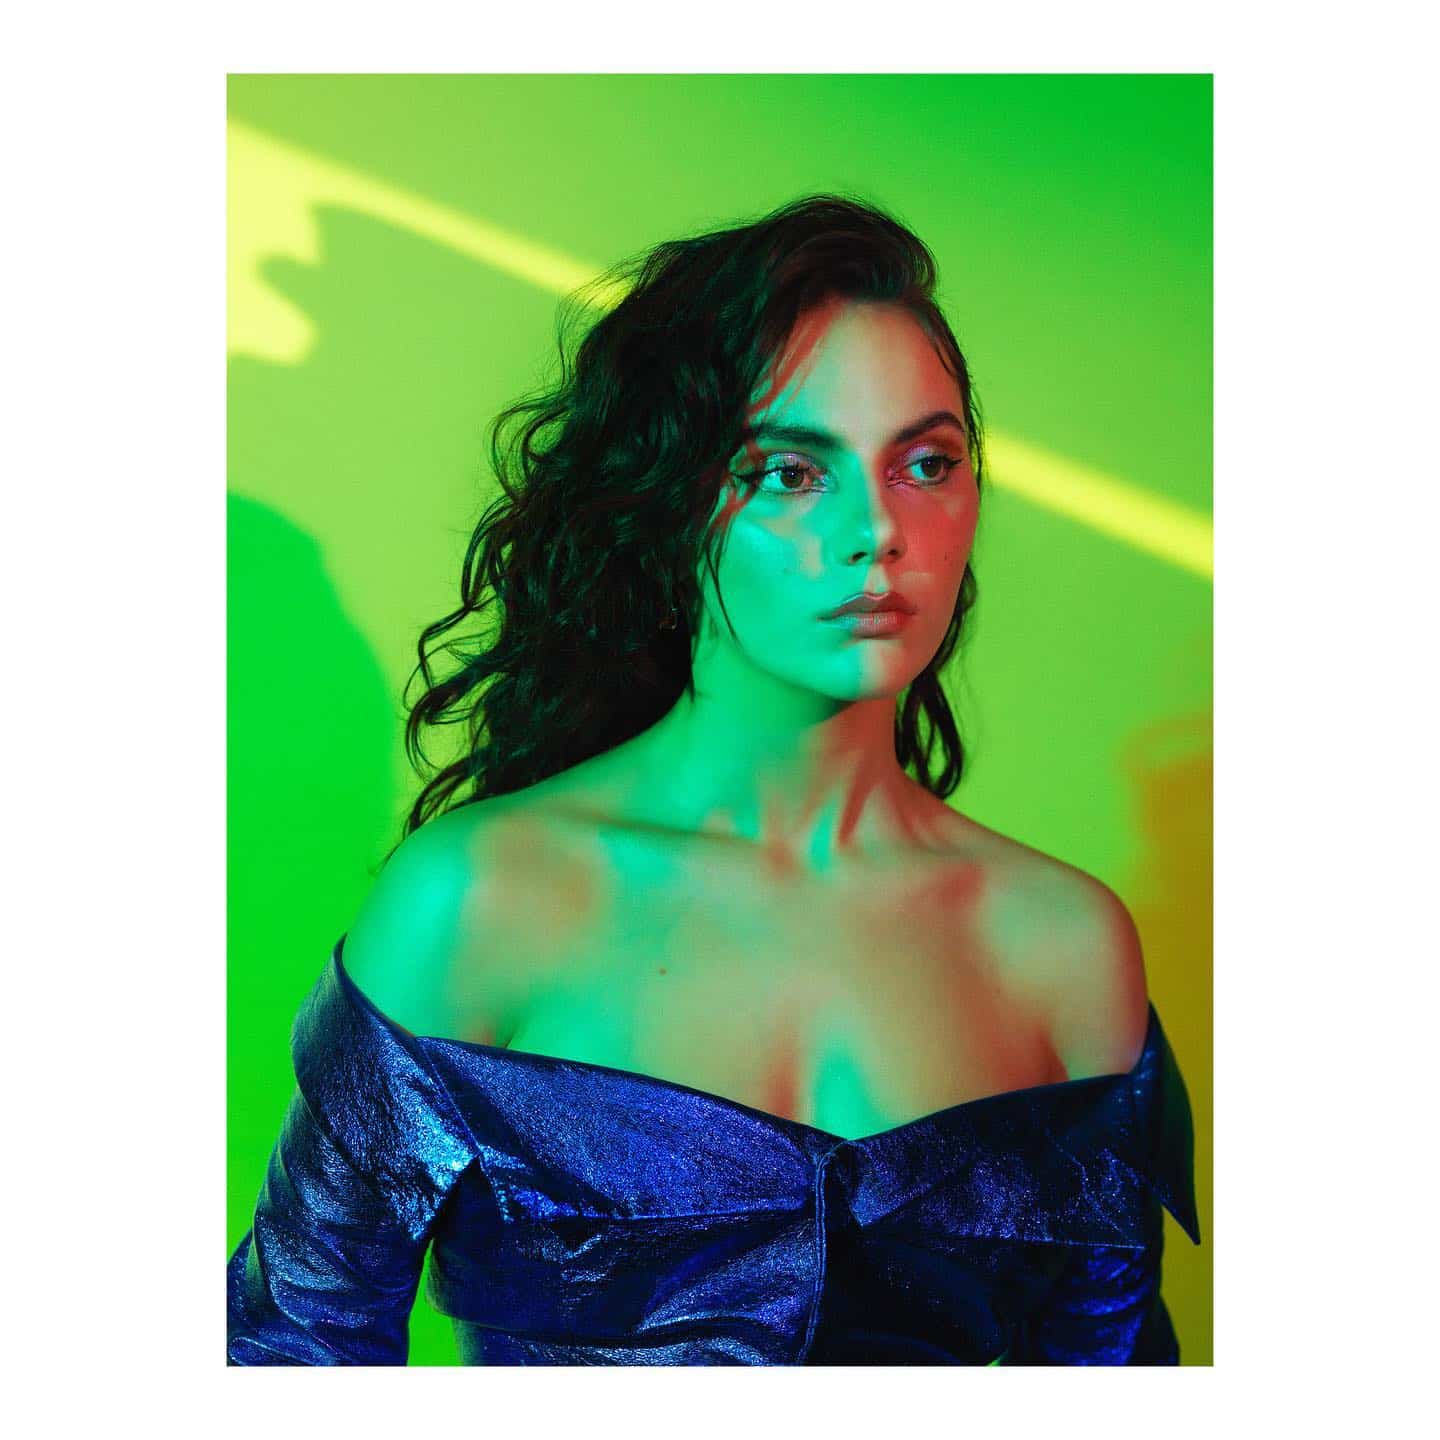 @dafnekeen discusses her role in the third and final season of His Dark Materials with @wmag.

Season 3 airs tomorrow, 5th December on HBO Max in the US 
.
.
.
📸 @josephsinclair 
‍♀️ @liztaw 
 @sarahillmakeup 
 @emilysusantighe 
✍️ @max_gao 
.
.
.